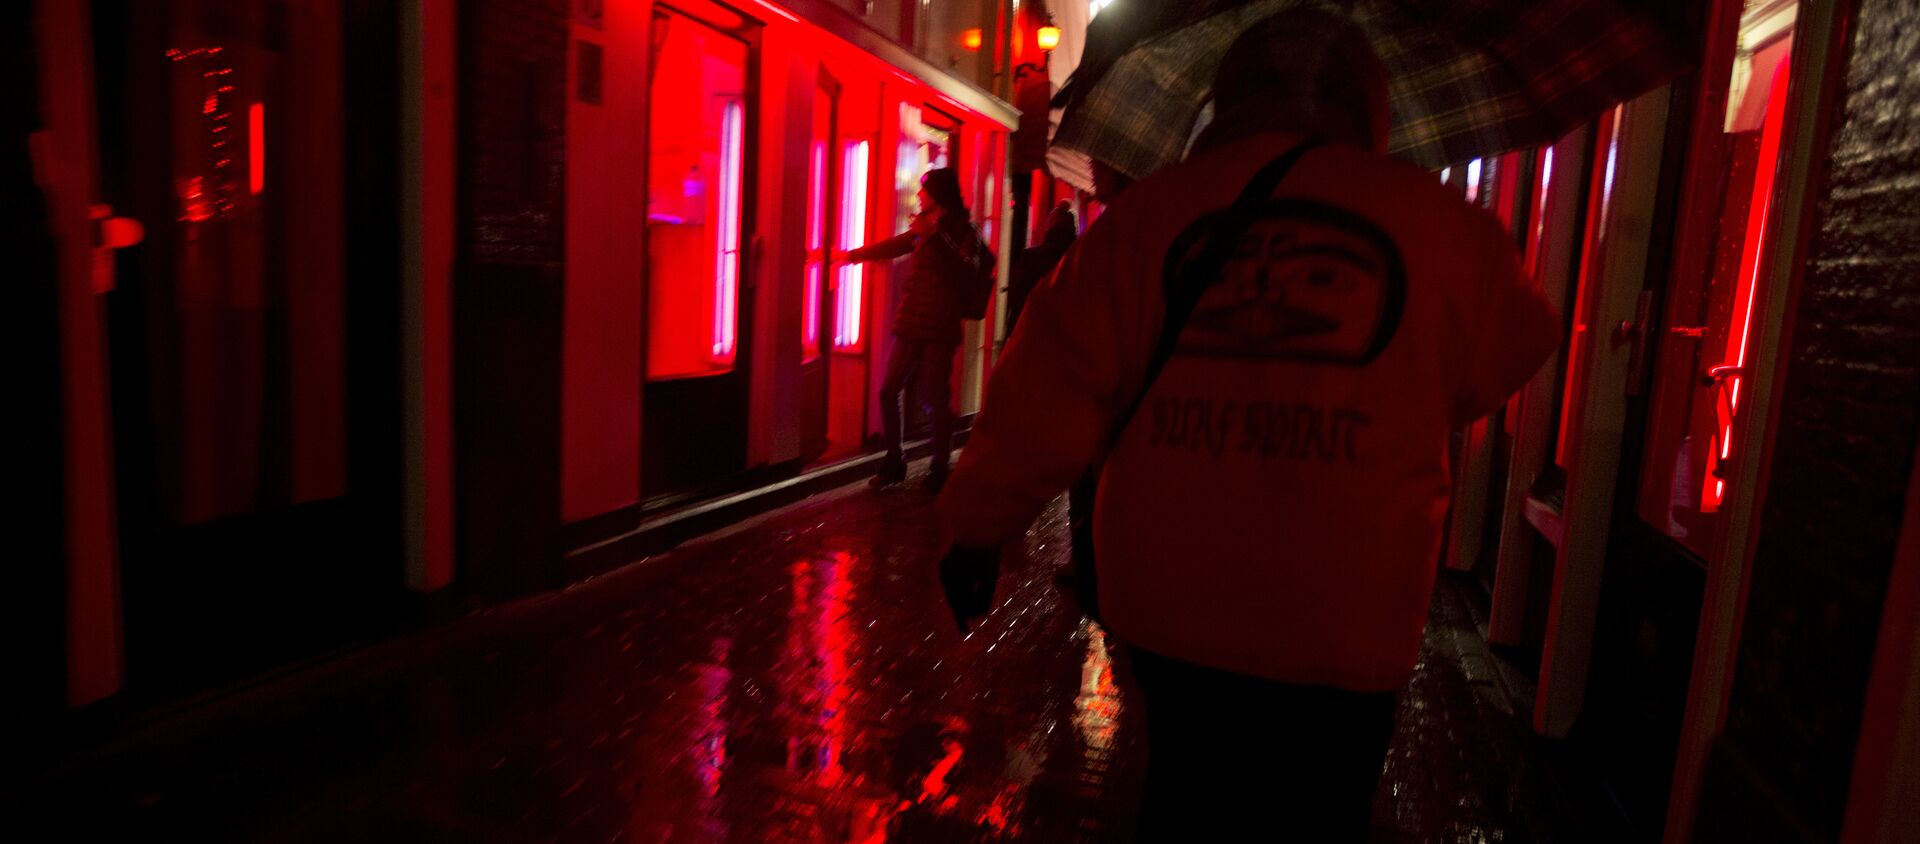 People walk through a narrow alley in the Red Light district in Amsterdam, Netherlands, Friday, Dec. 8, 2017. Every weekend, the heart of the historic port city, with its strip joints, seedy bars and scantily-clad prostitutes flaunting themselves behind plate glass windows, is overrun by foreign visitors over for stag and hen nights or to smoke marijuana in one of the city's many coffee shops. - Sputnik International, 1920